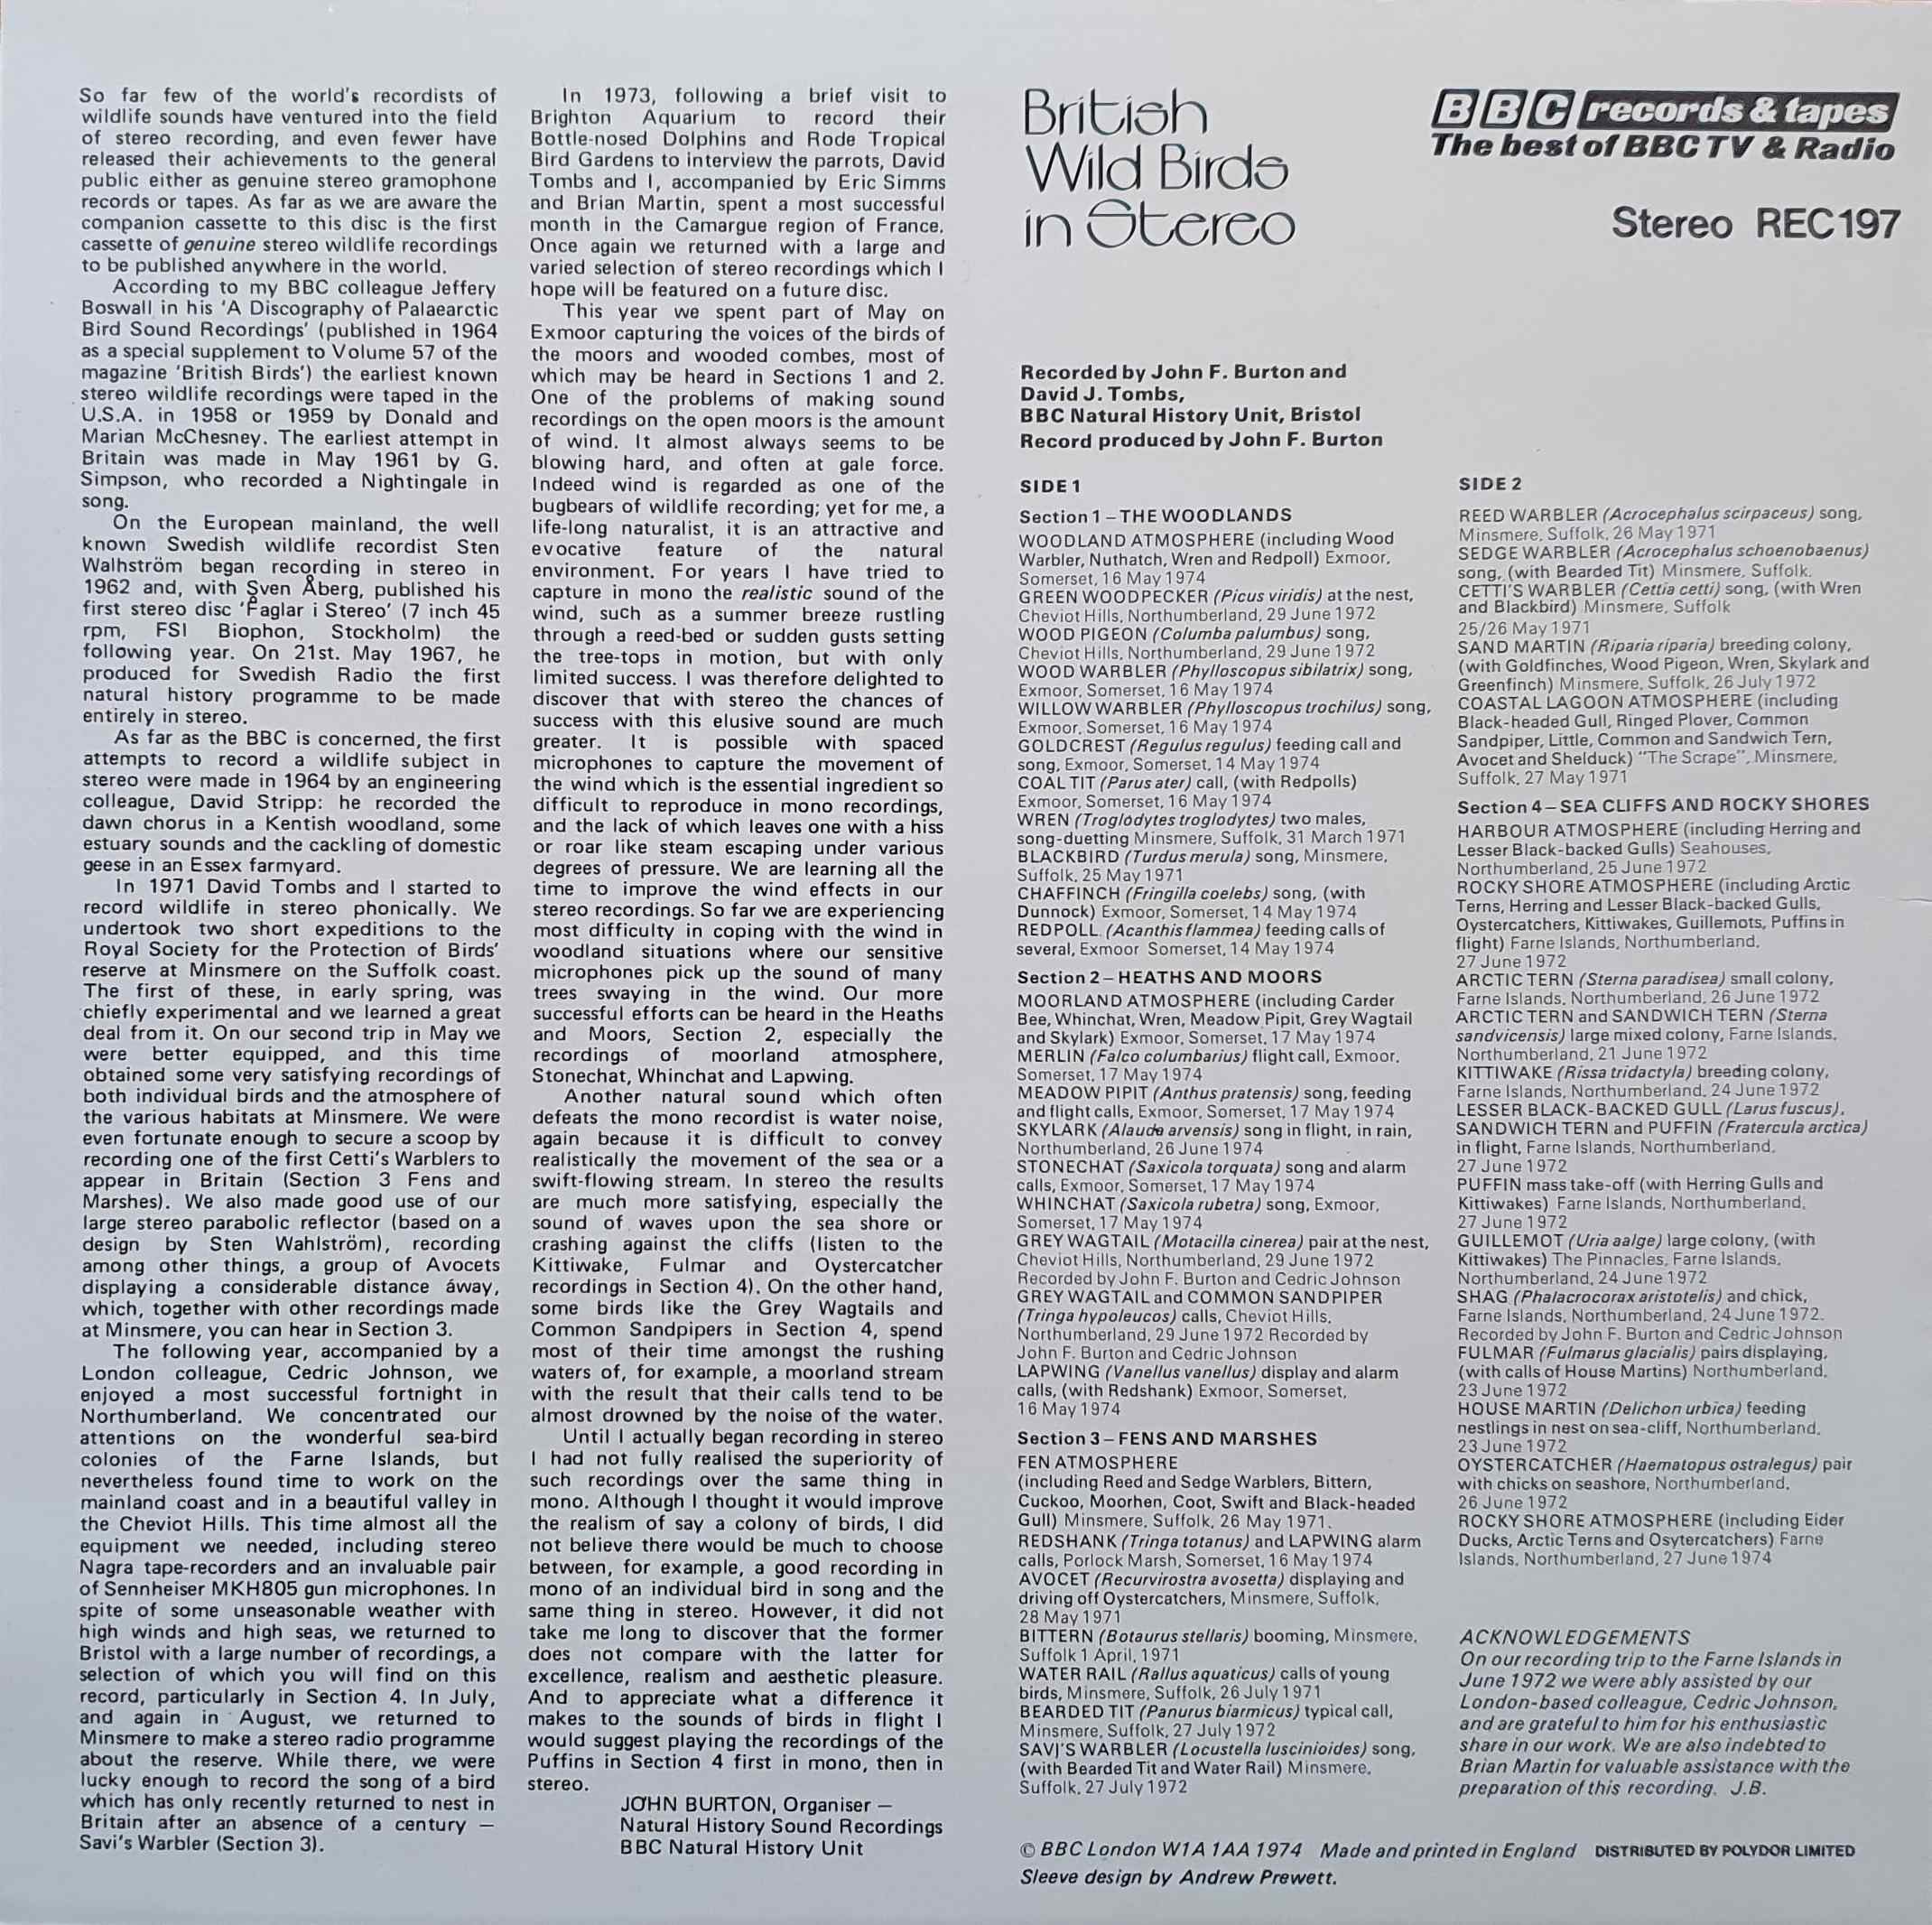 Back cover of REC 197